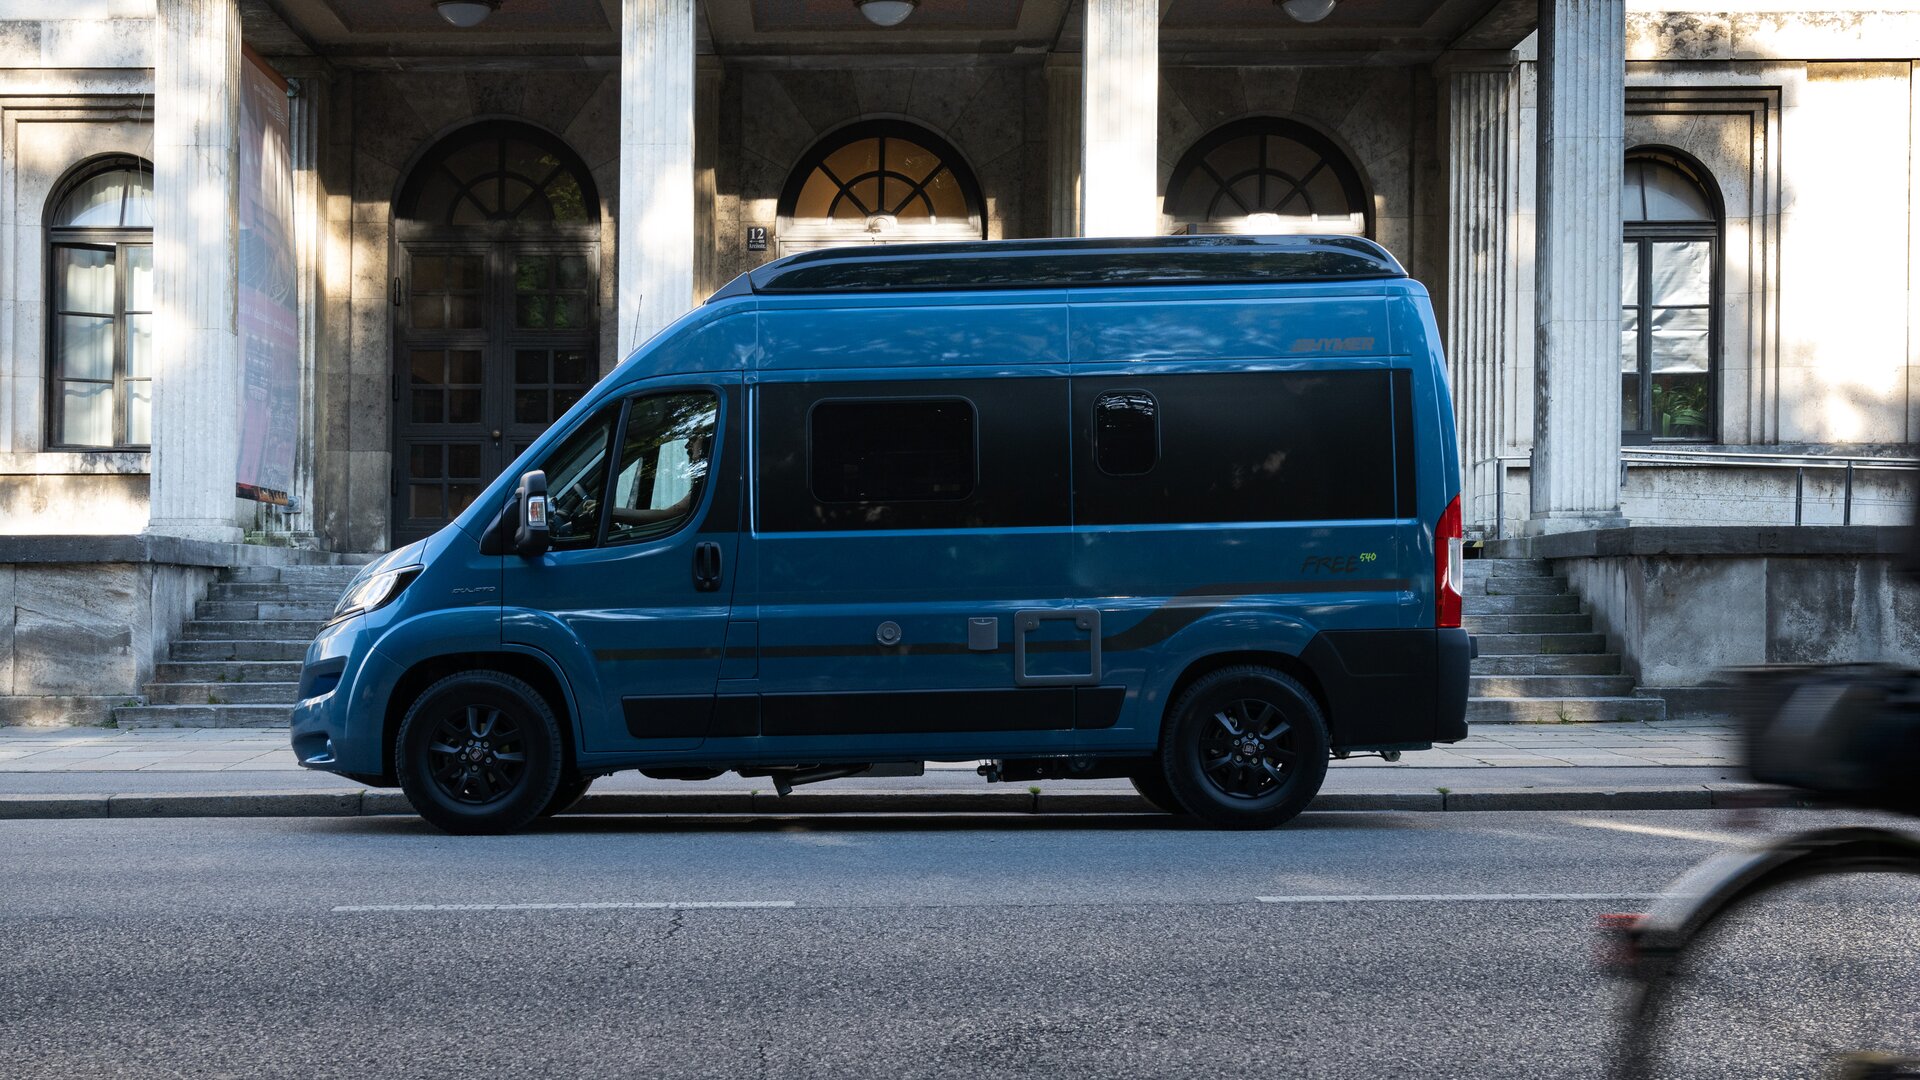 HYMER Free 540 Blue Evolution, painted blue metallic, drives past an old building